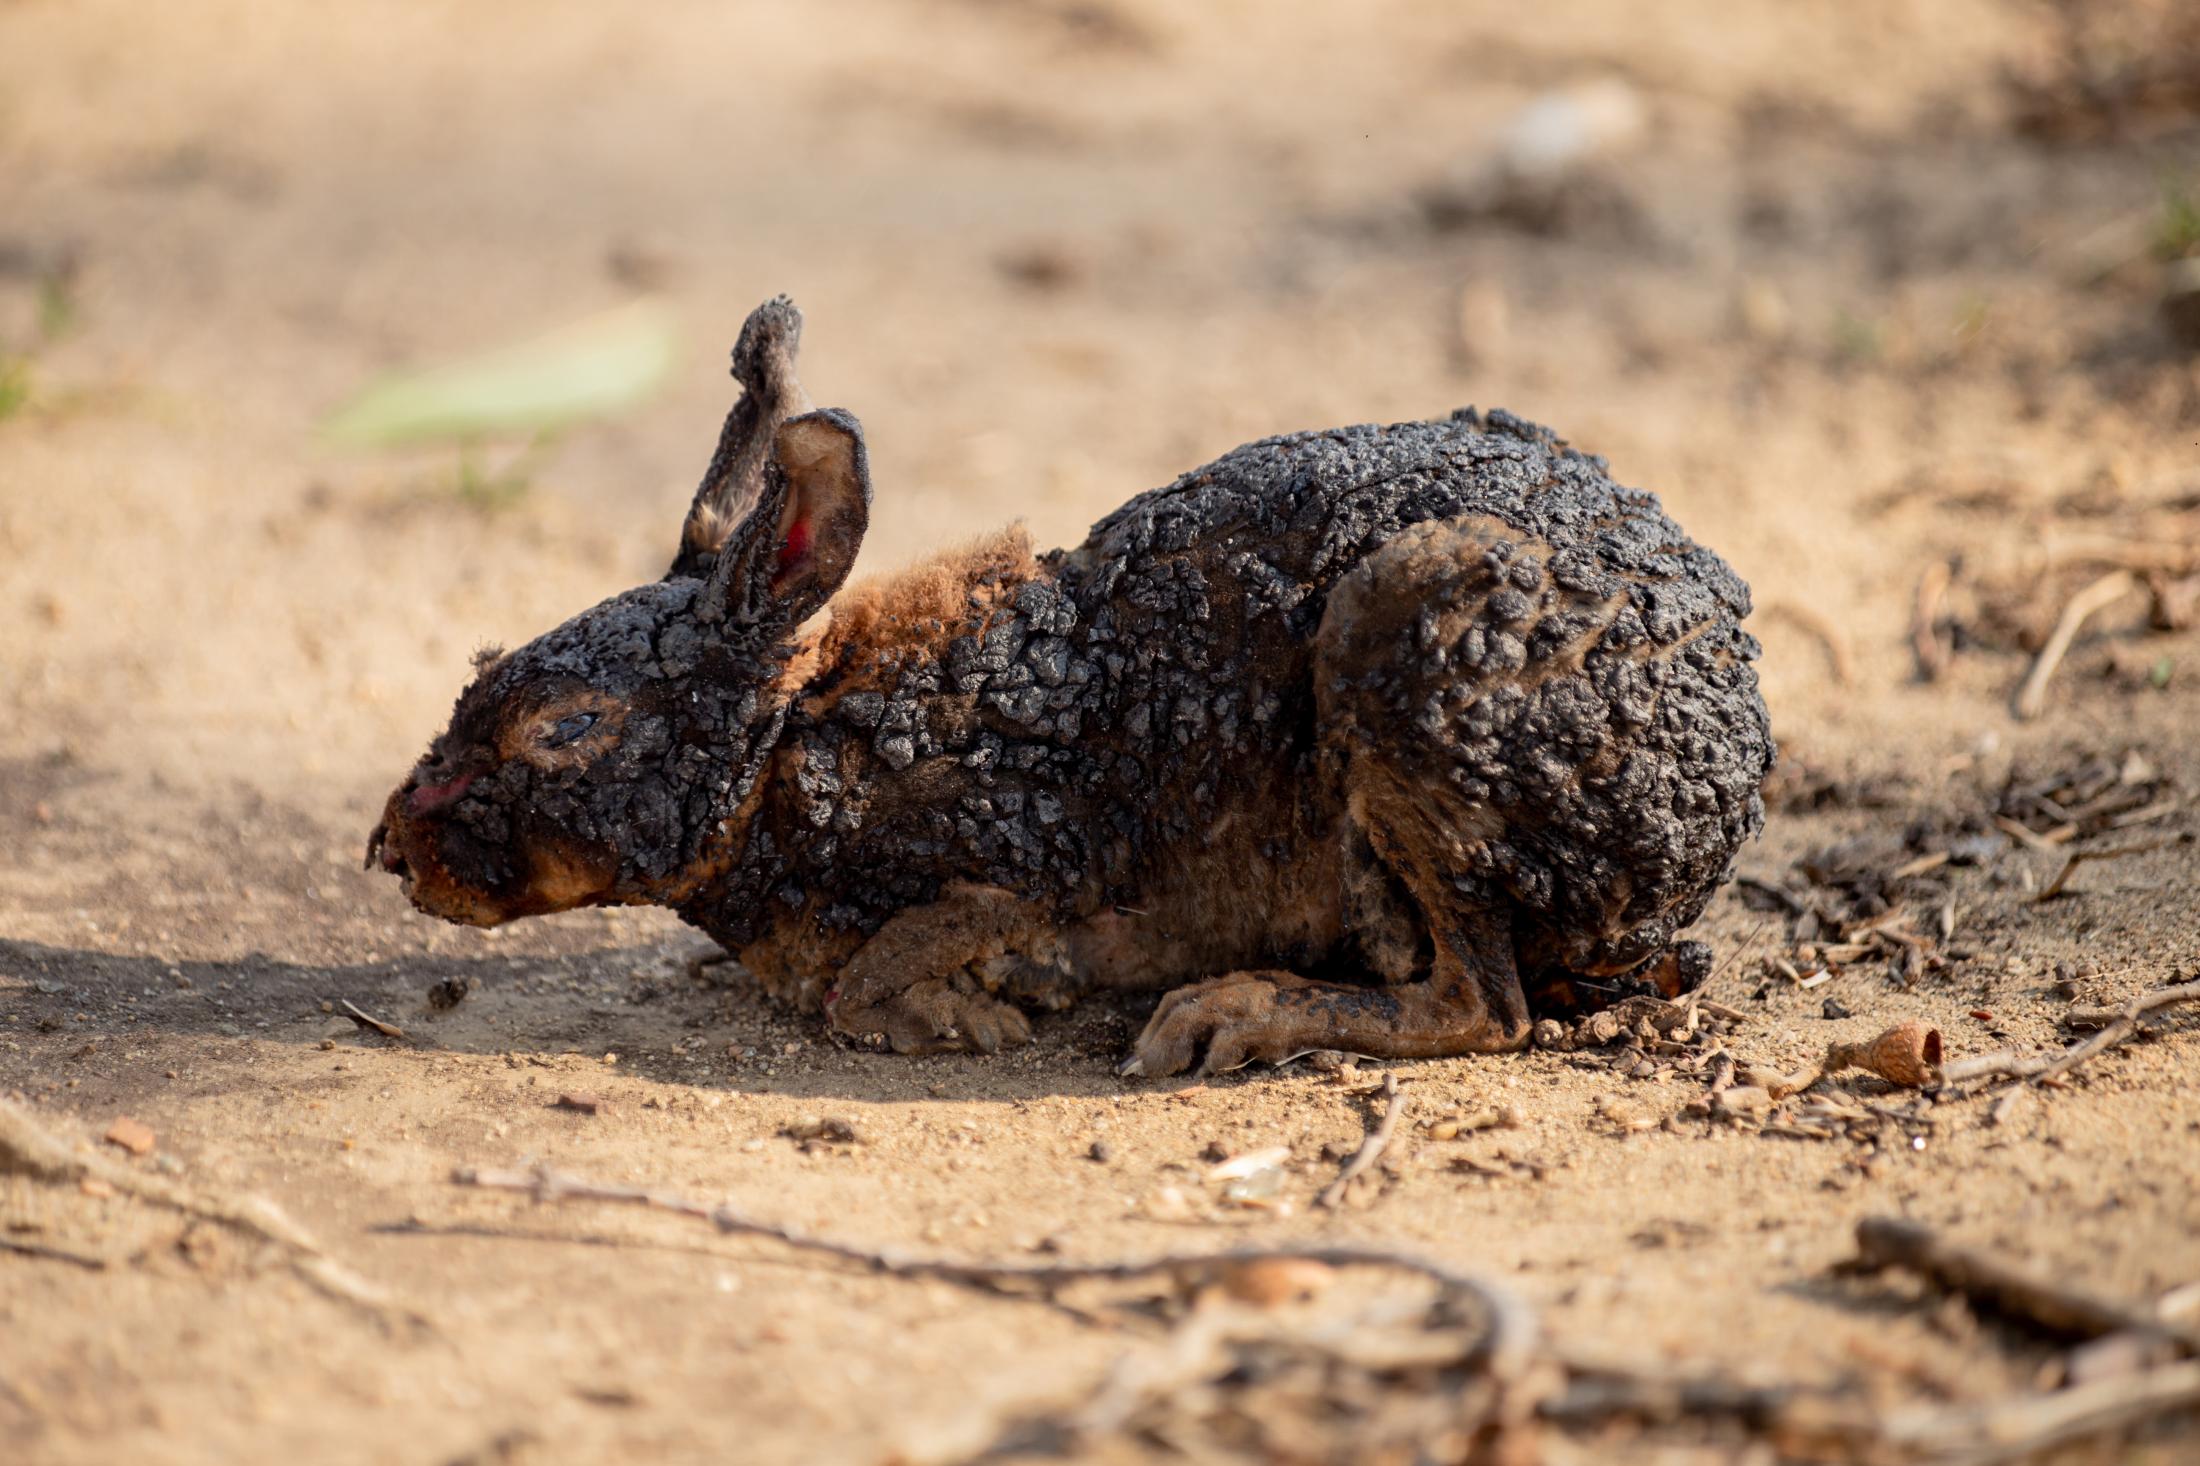 Nature of Fire - A burnt rabbit's fur melted to its body, and the pain...